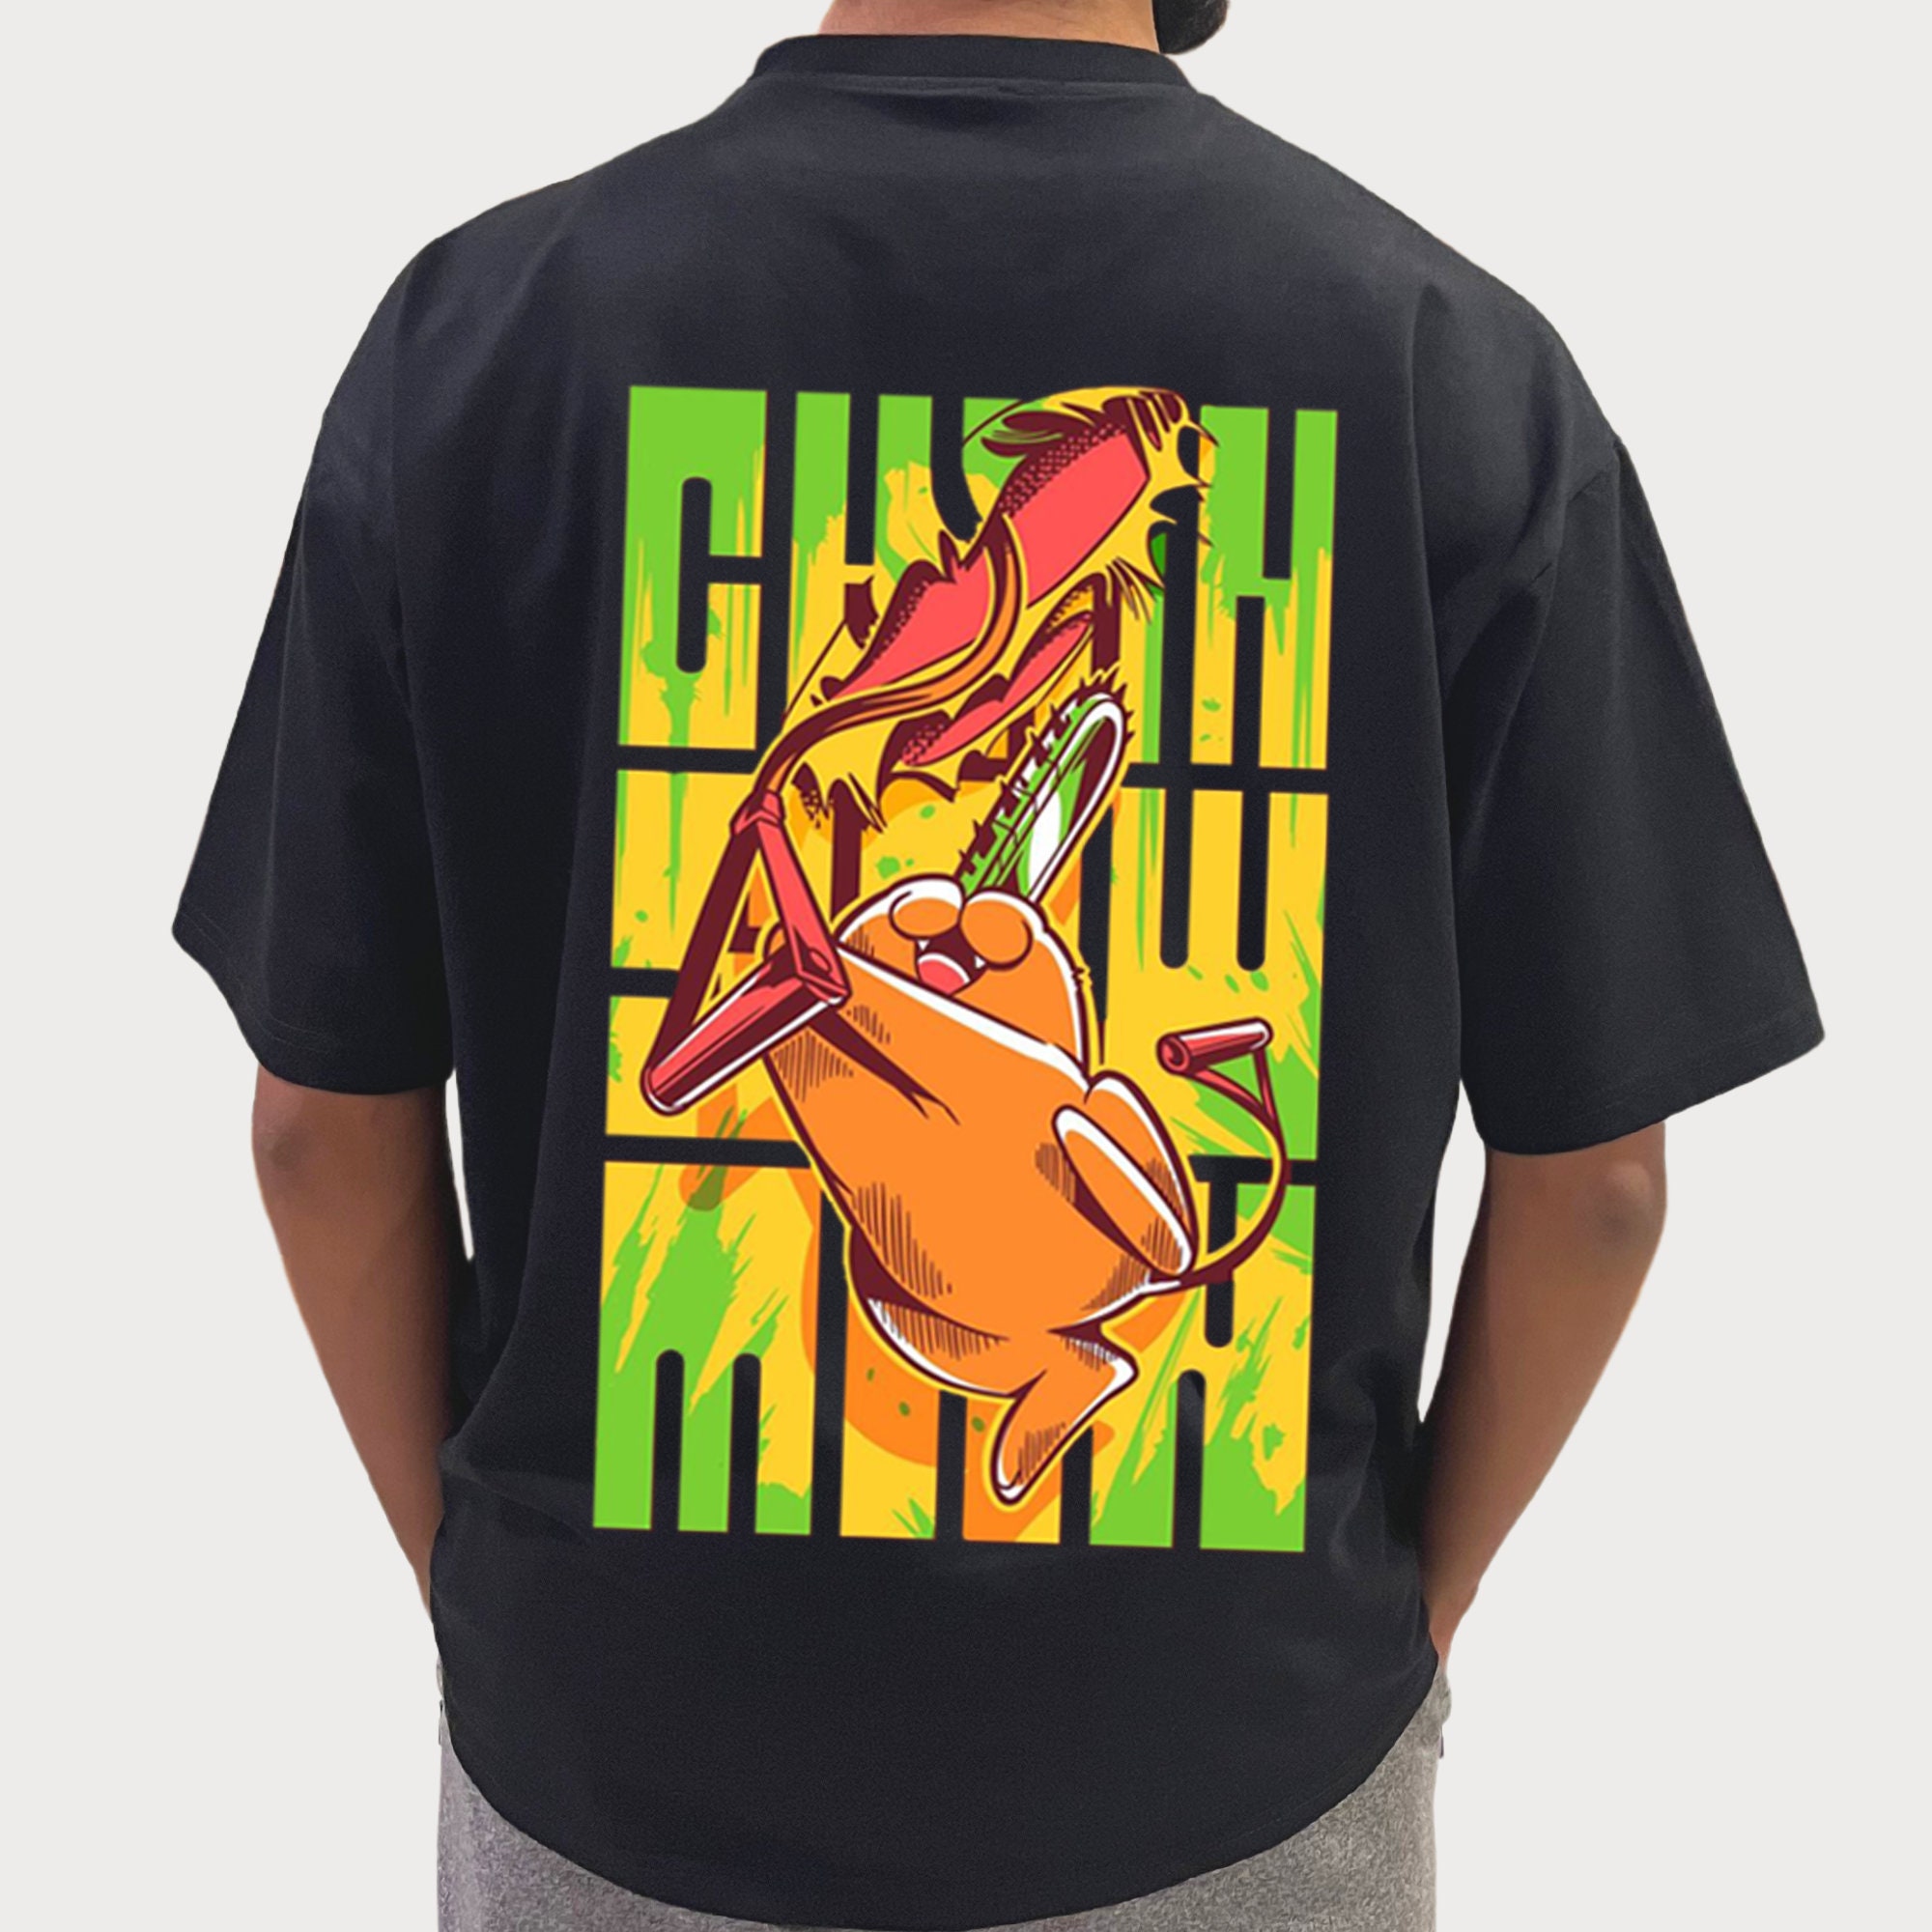 Buy Anime Shirt Online In India - Etsy India